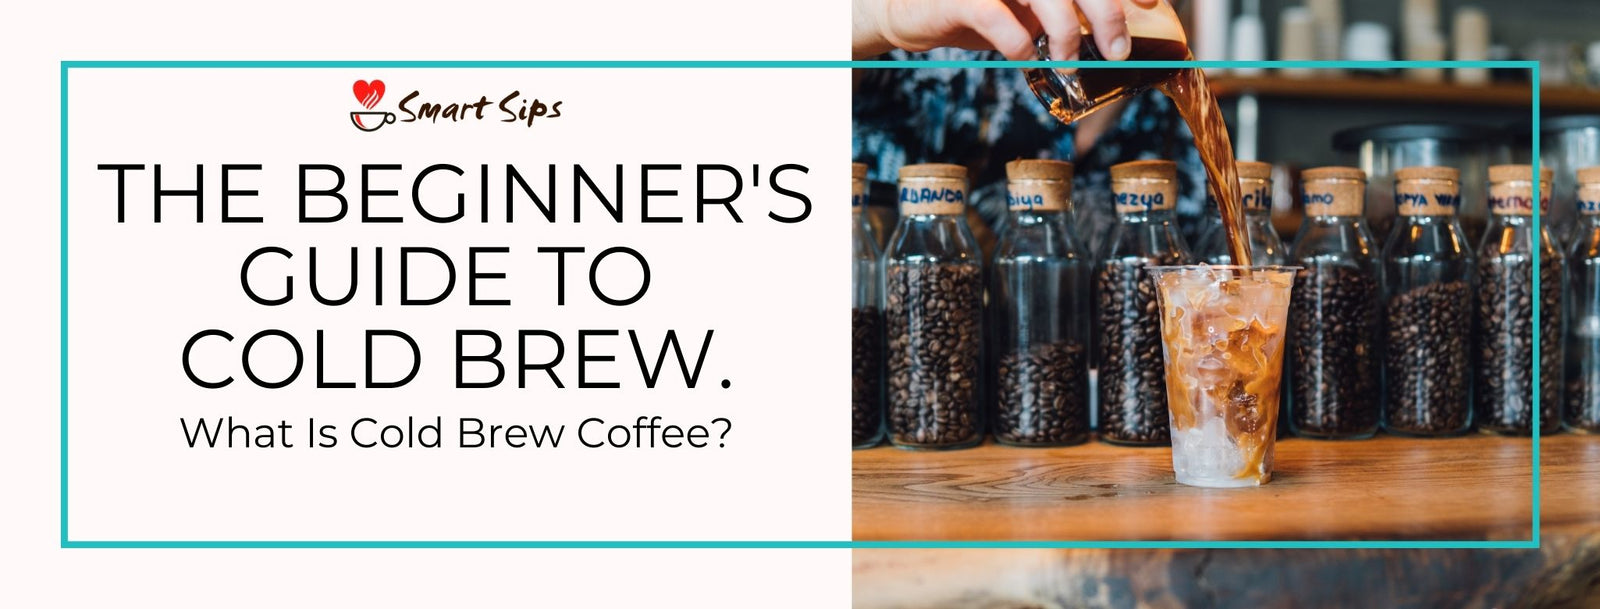 The Beginners Guide to Cold Brew Coffee - What Is Cold Brew?